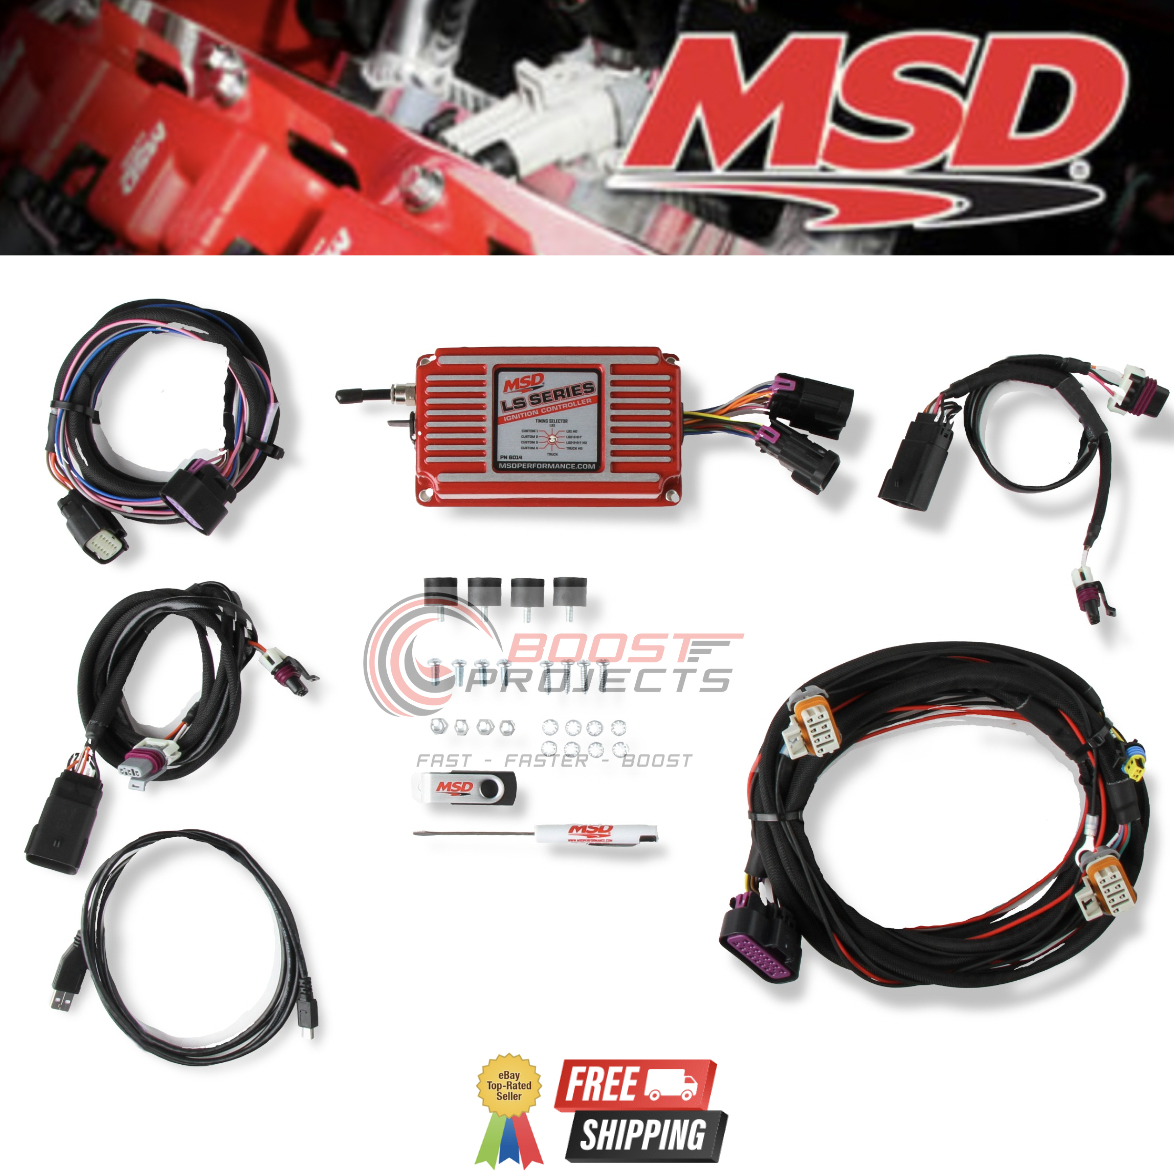 MSD 6014 Holley Digital Ignition Control Box Red Built-In Adjustable Rev-Limit Control